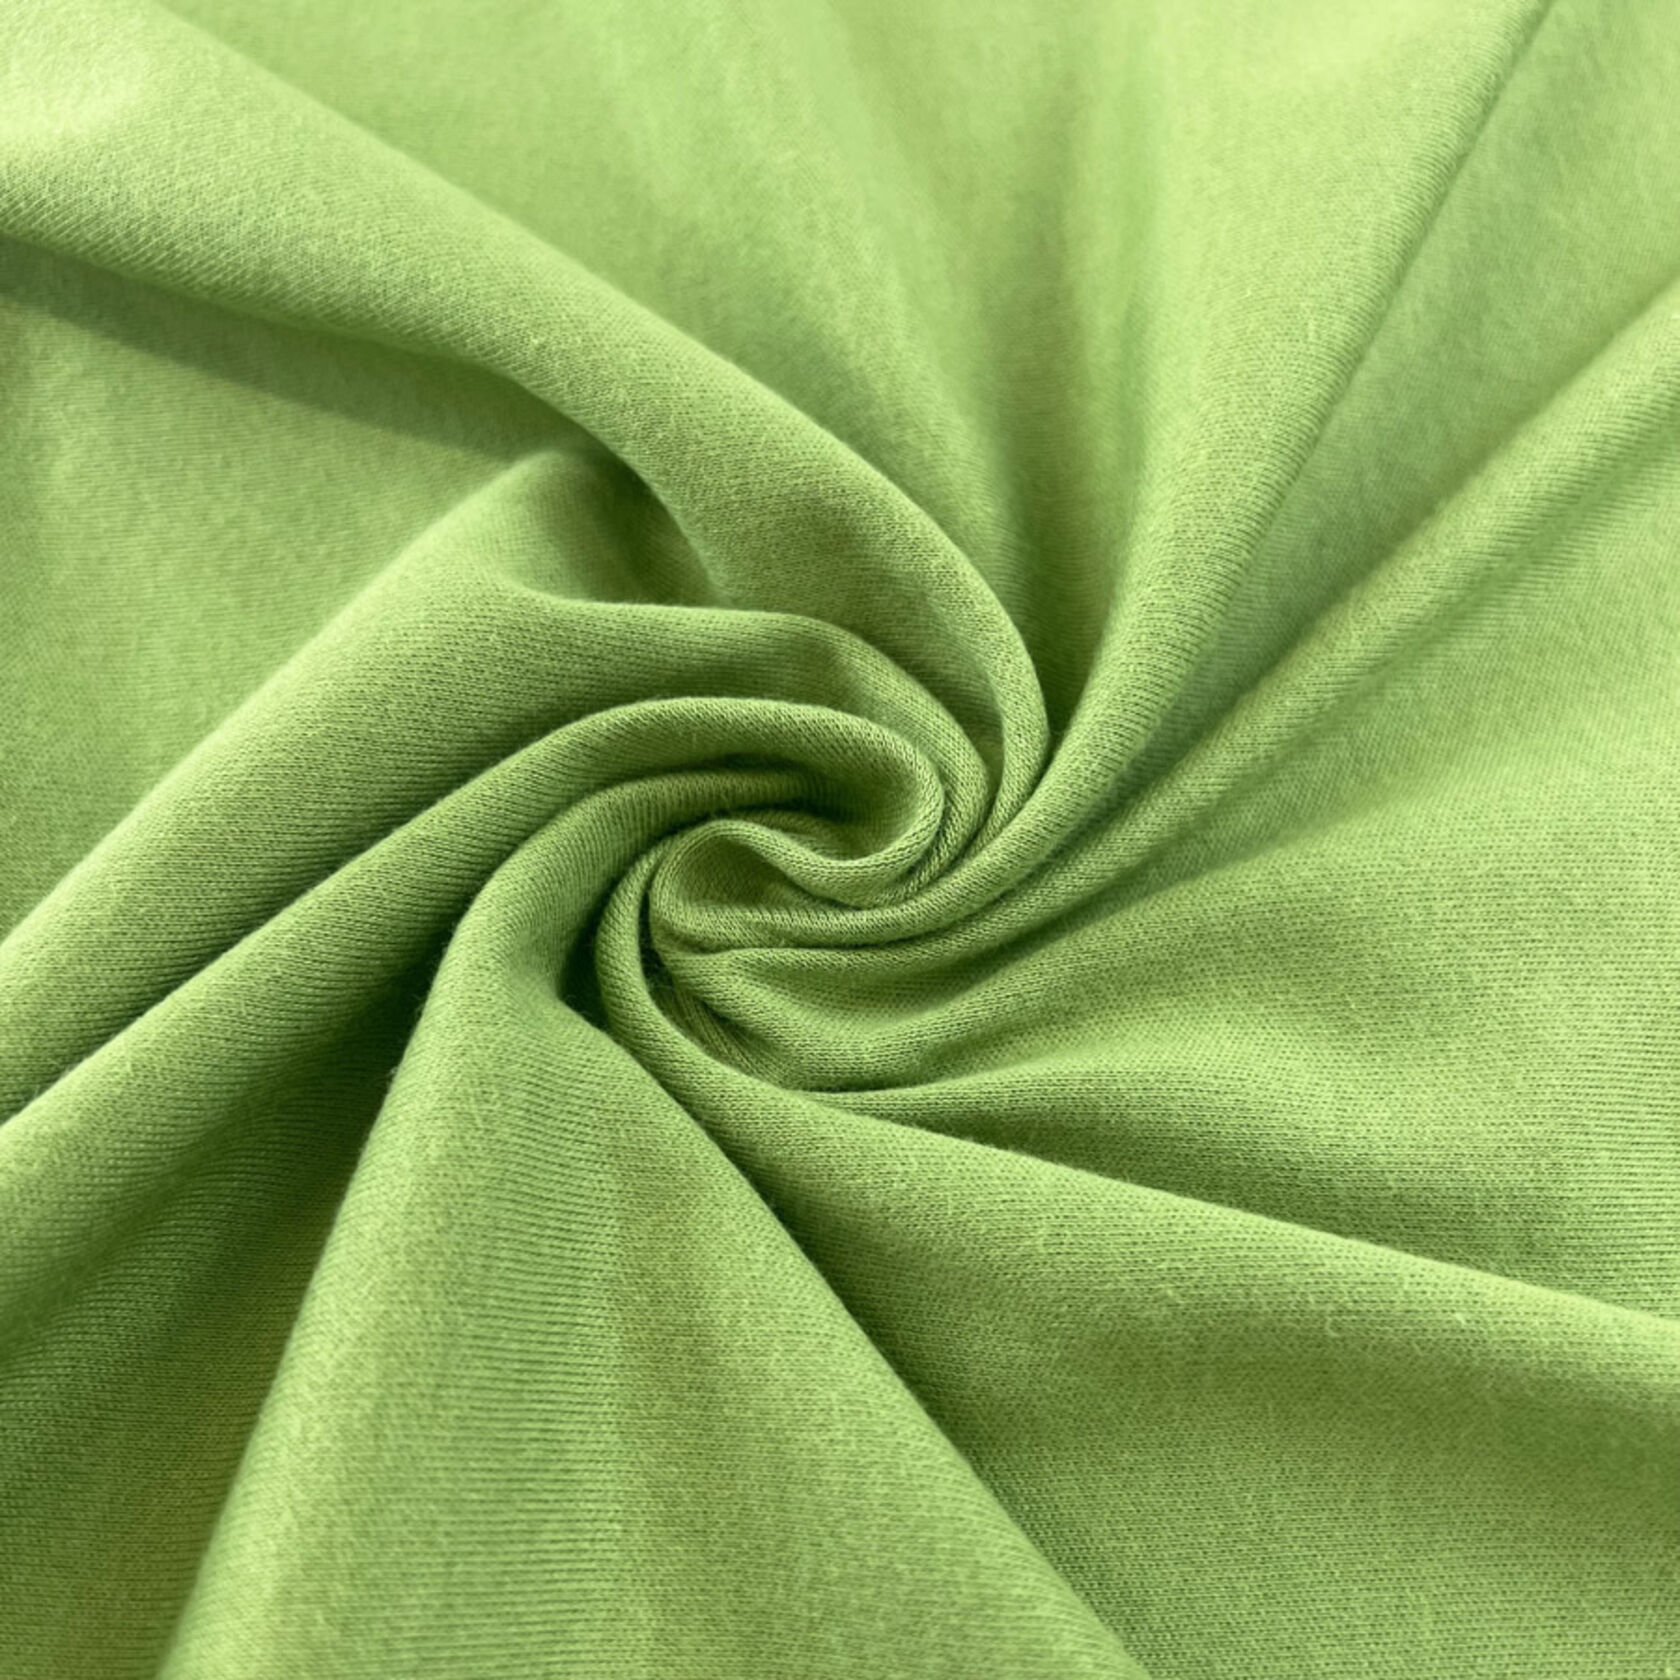 What is jersey fabric?